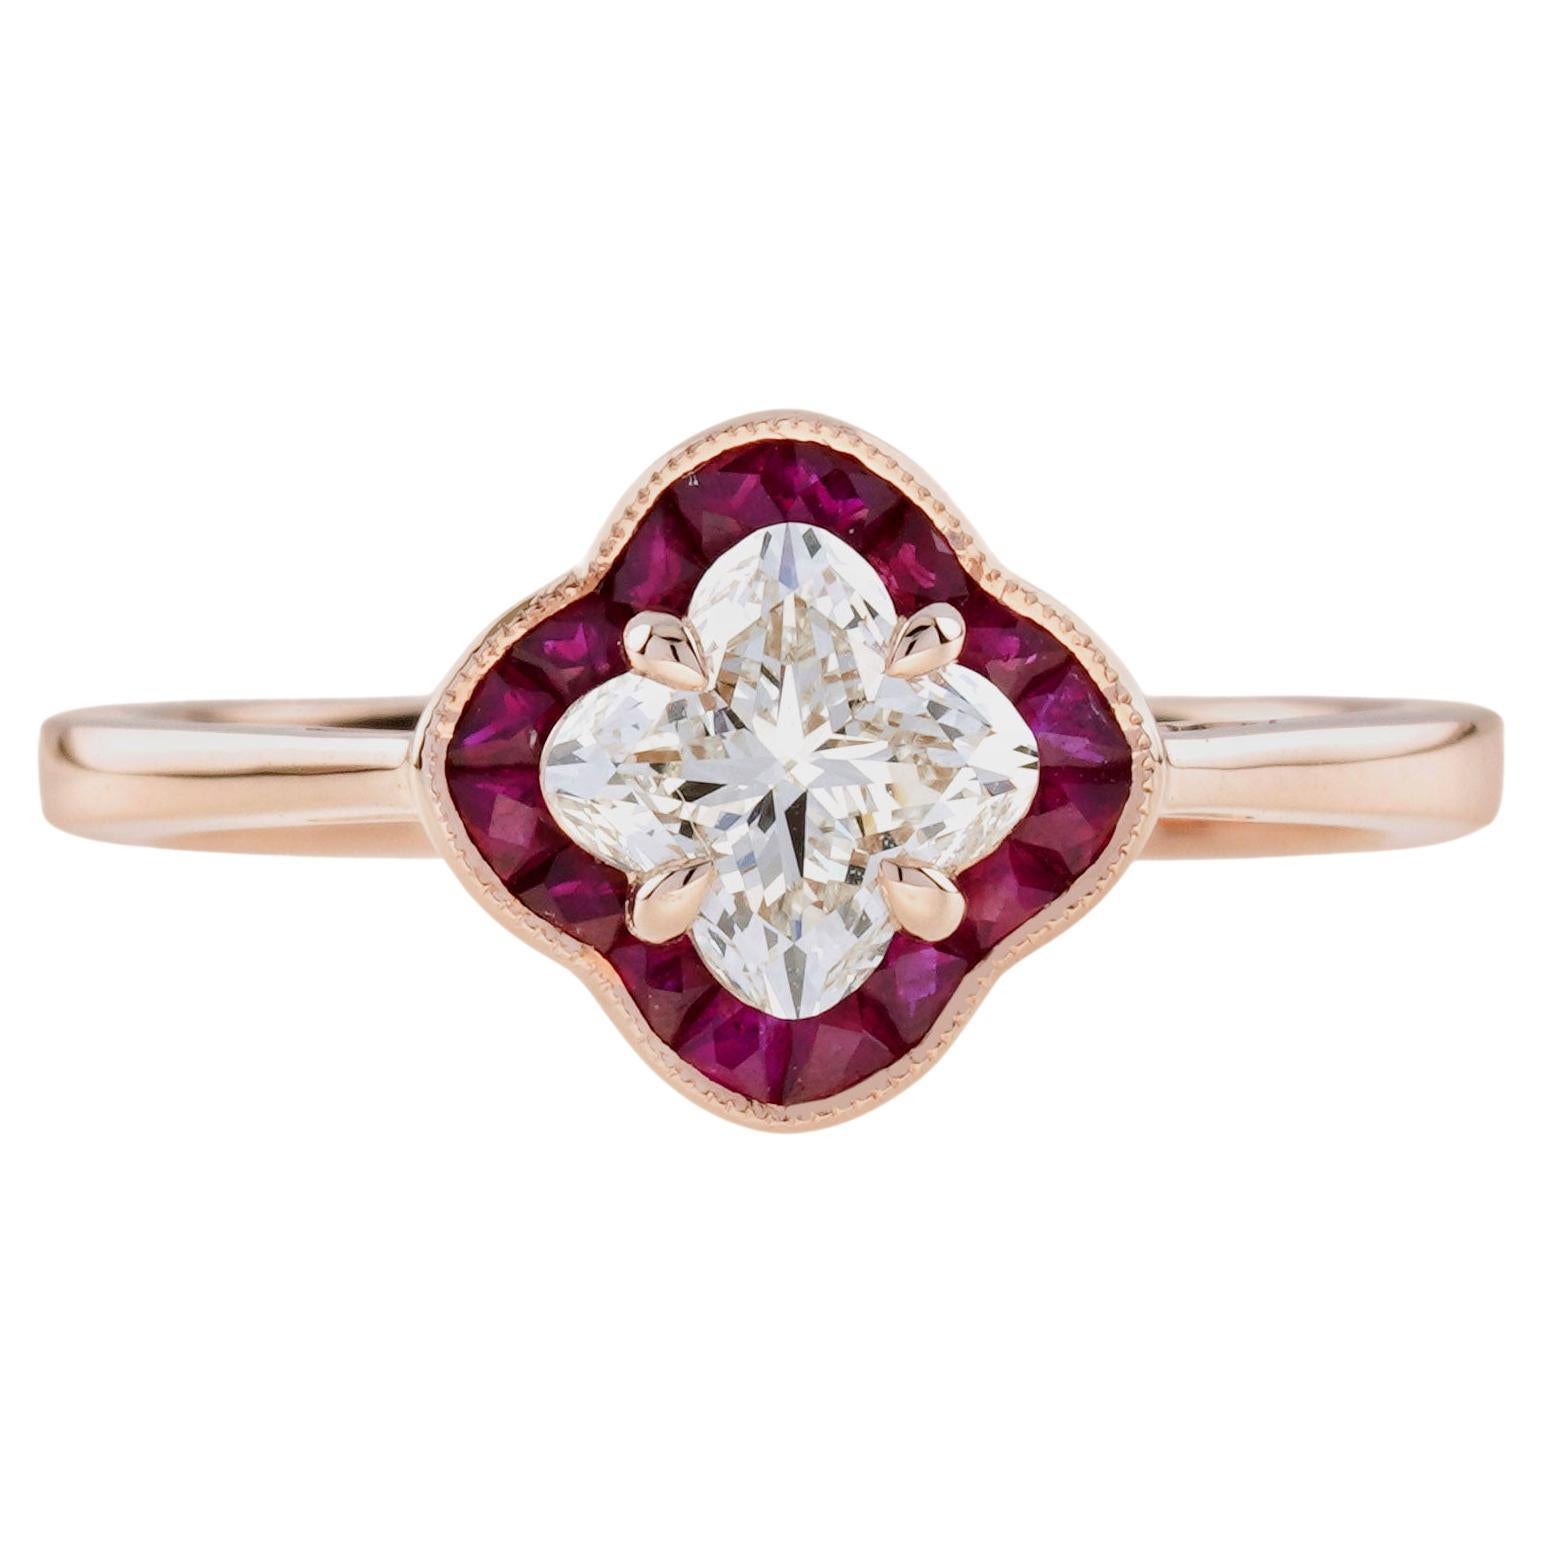 The Lilly Signature GIA Diamond and Ruby Engagement Ring in 18K Rose Gold